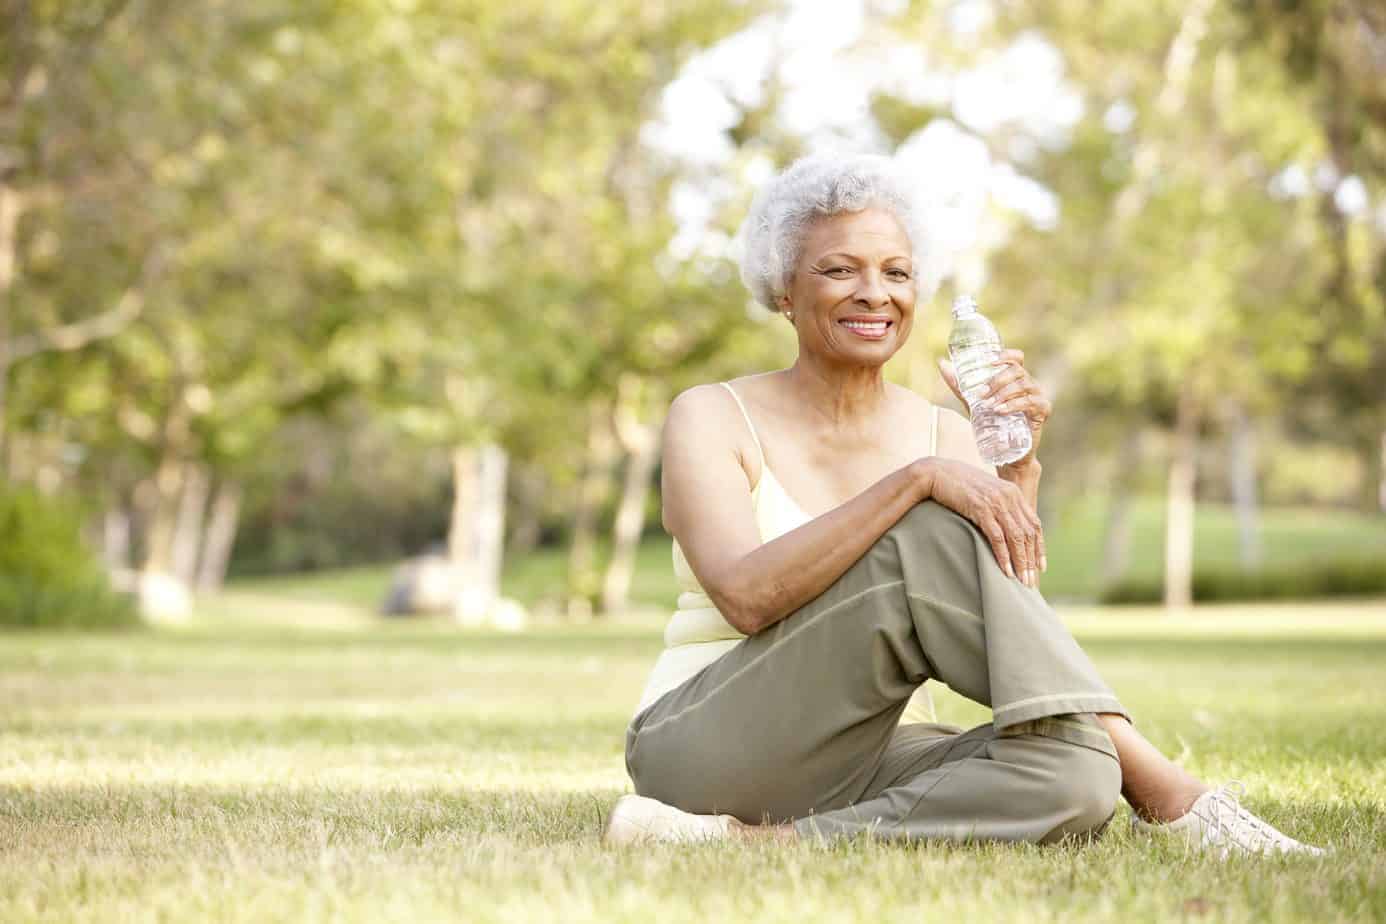 African American lady with curly gray hair sitting the park after a workout.